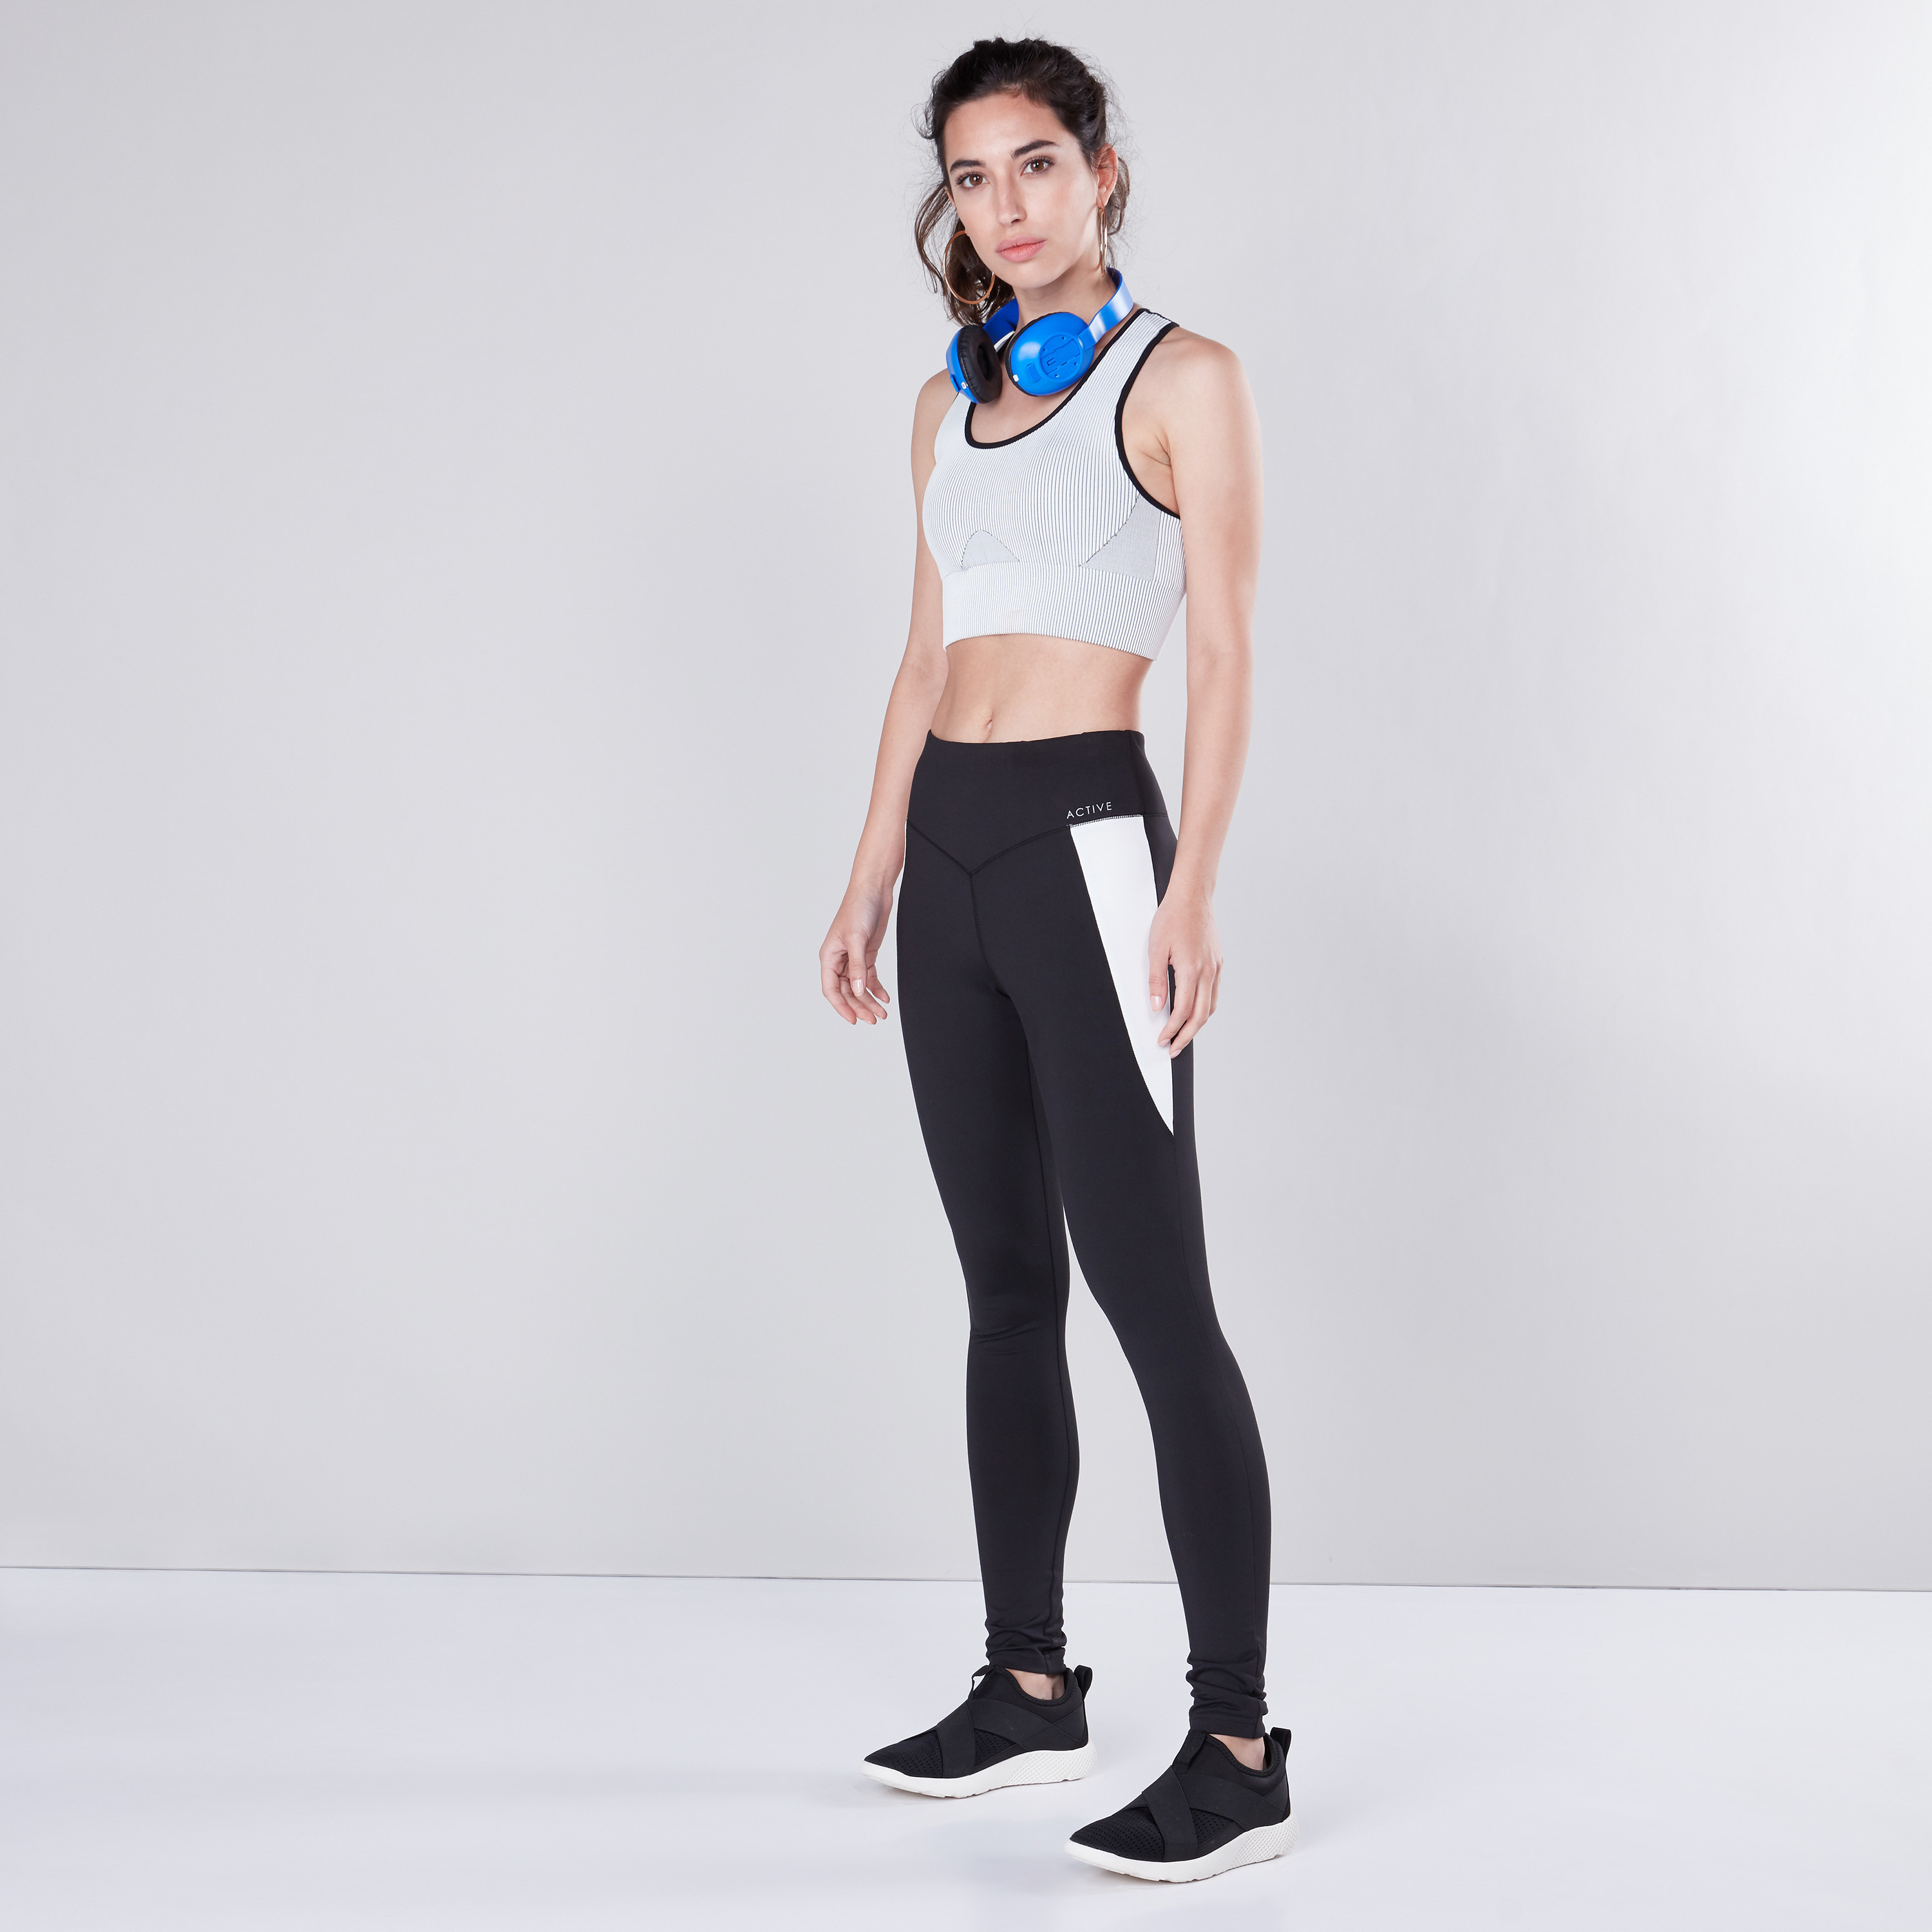 LL Yoga Leggings High Wasit V Shape With Align Sequins Printed Seamless Gym  Pant Legging For Fitness CK12626275475 From Ninn, $20.68 | DHgate.Com